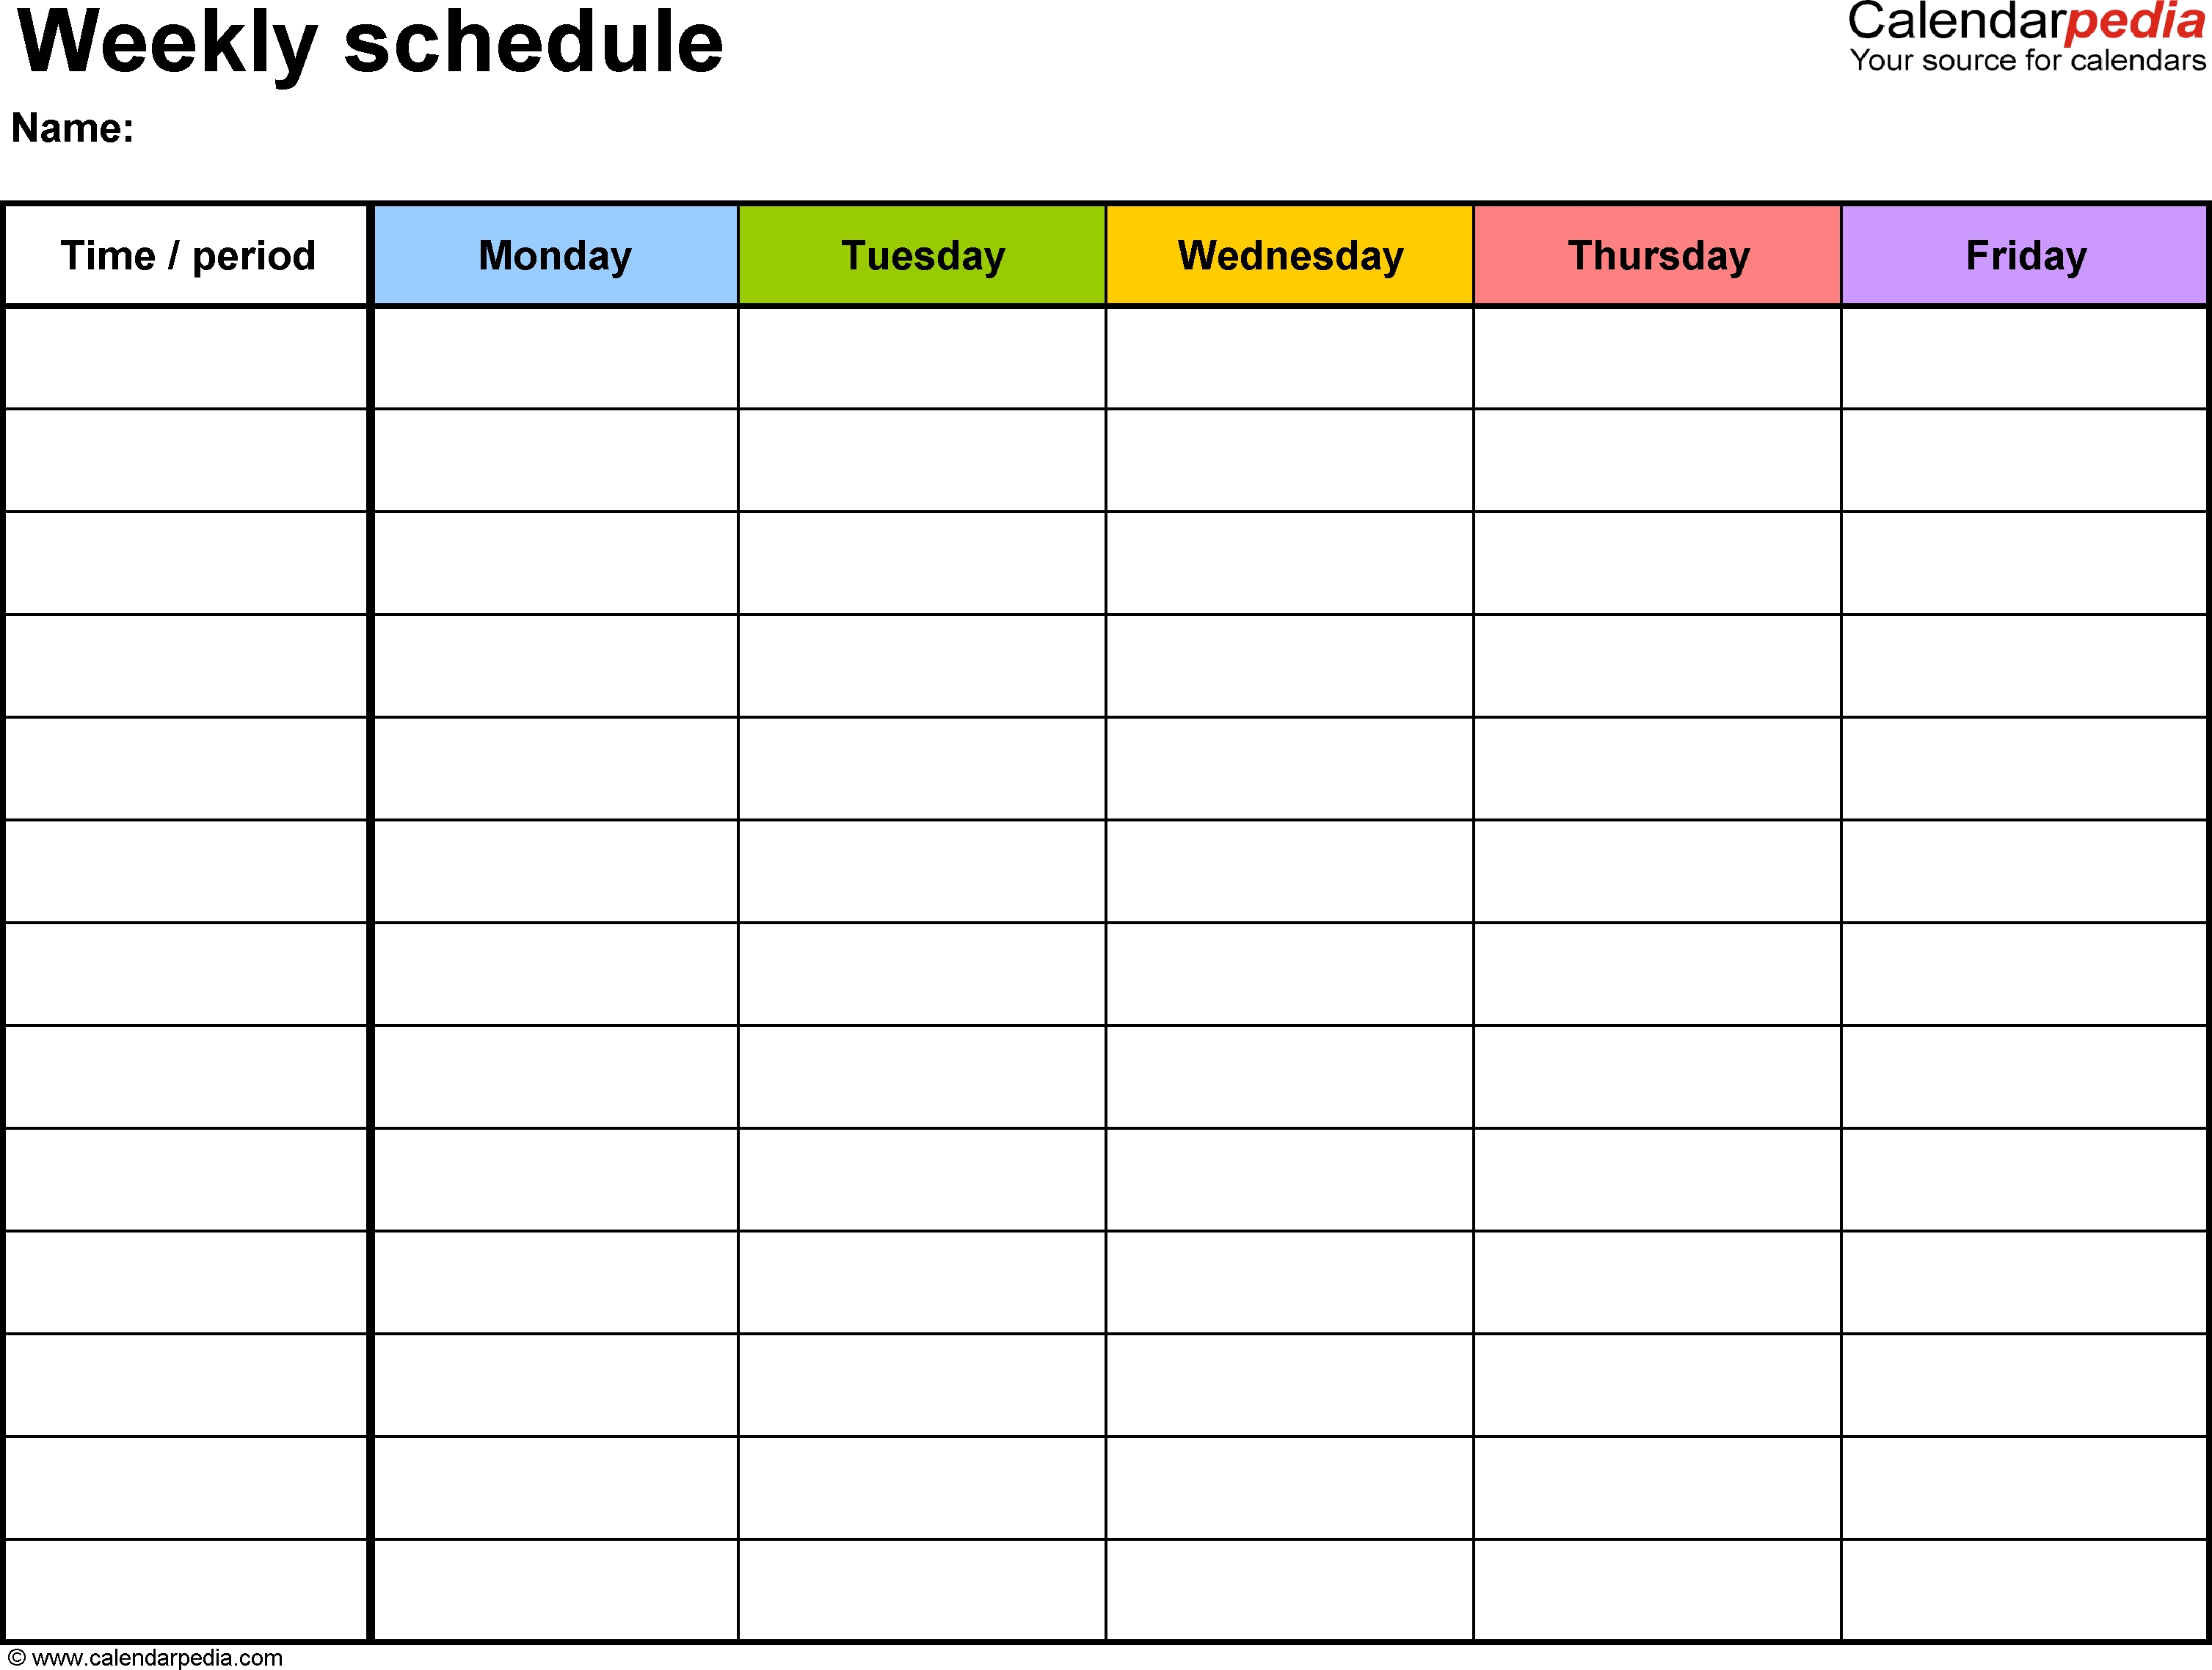 Free Weekly Schedule Templates For Excel - 18 Templates Week Of Calendar Template